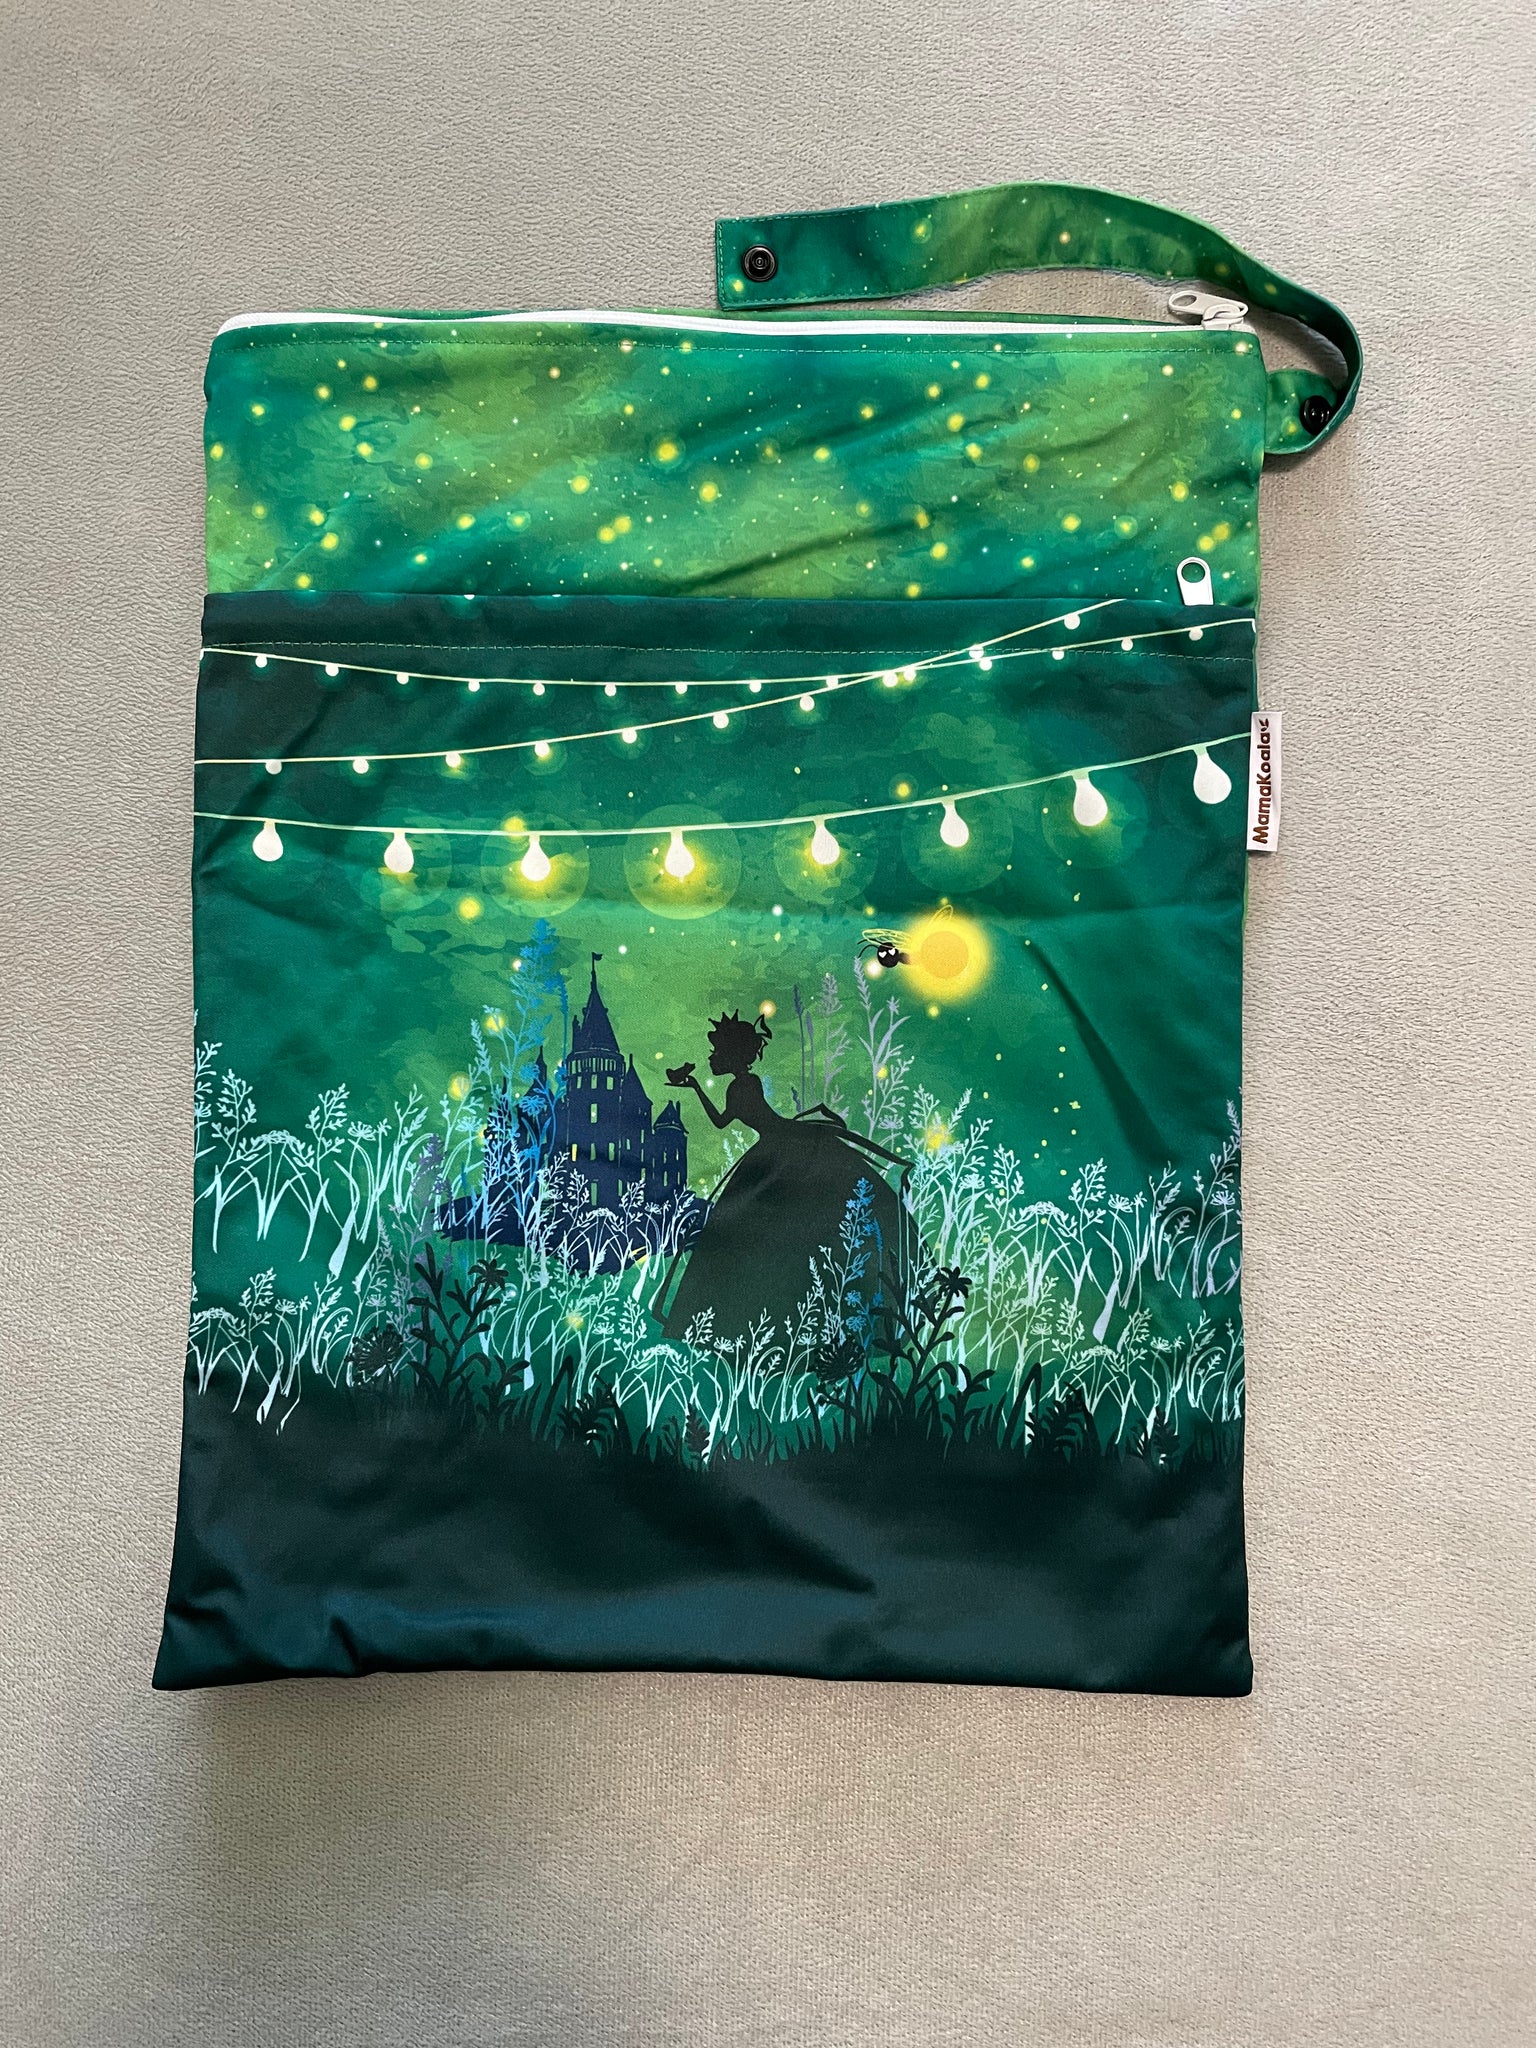 Mama Koala Wet Bag-WB06-The Princess with Frog in the dark